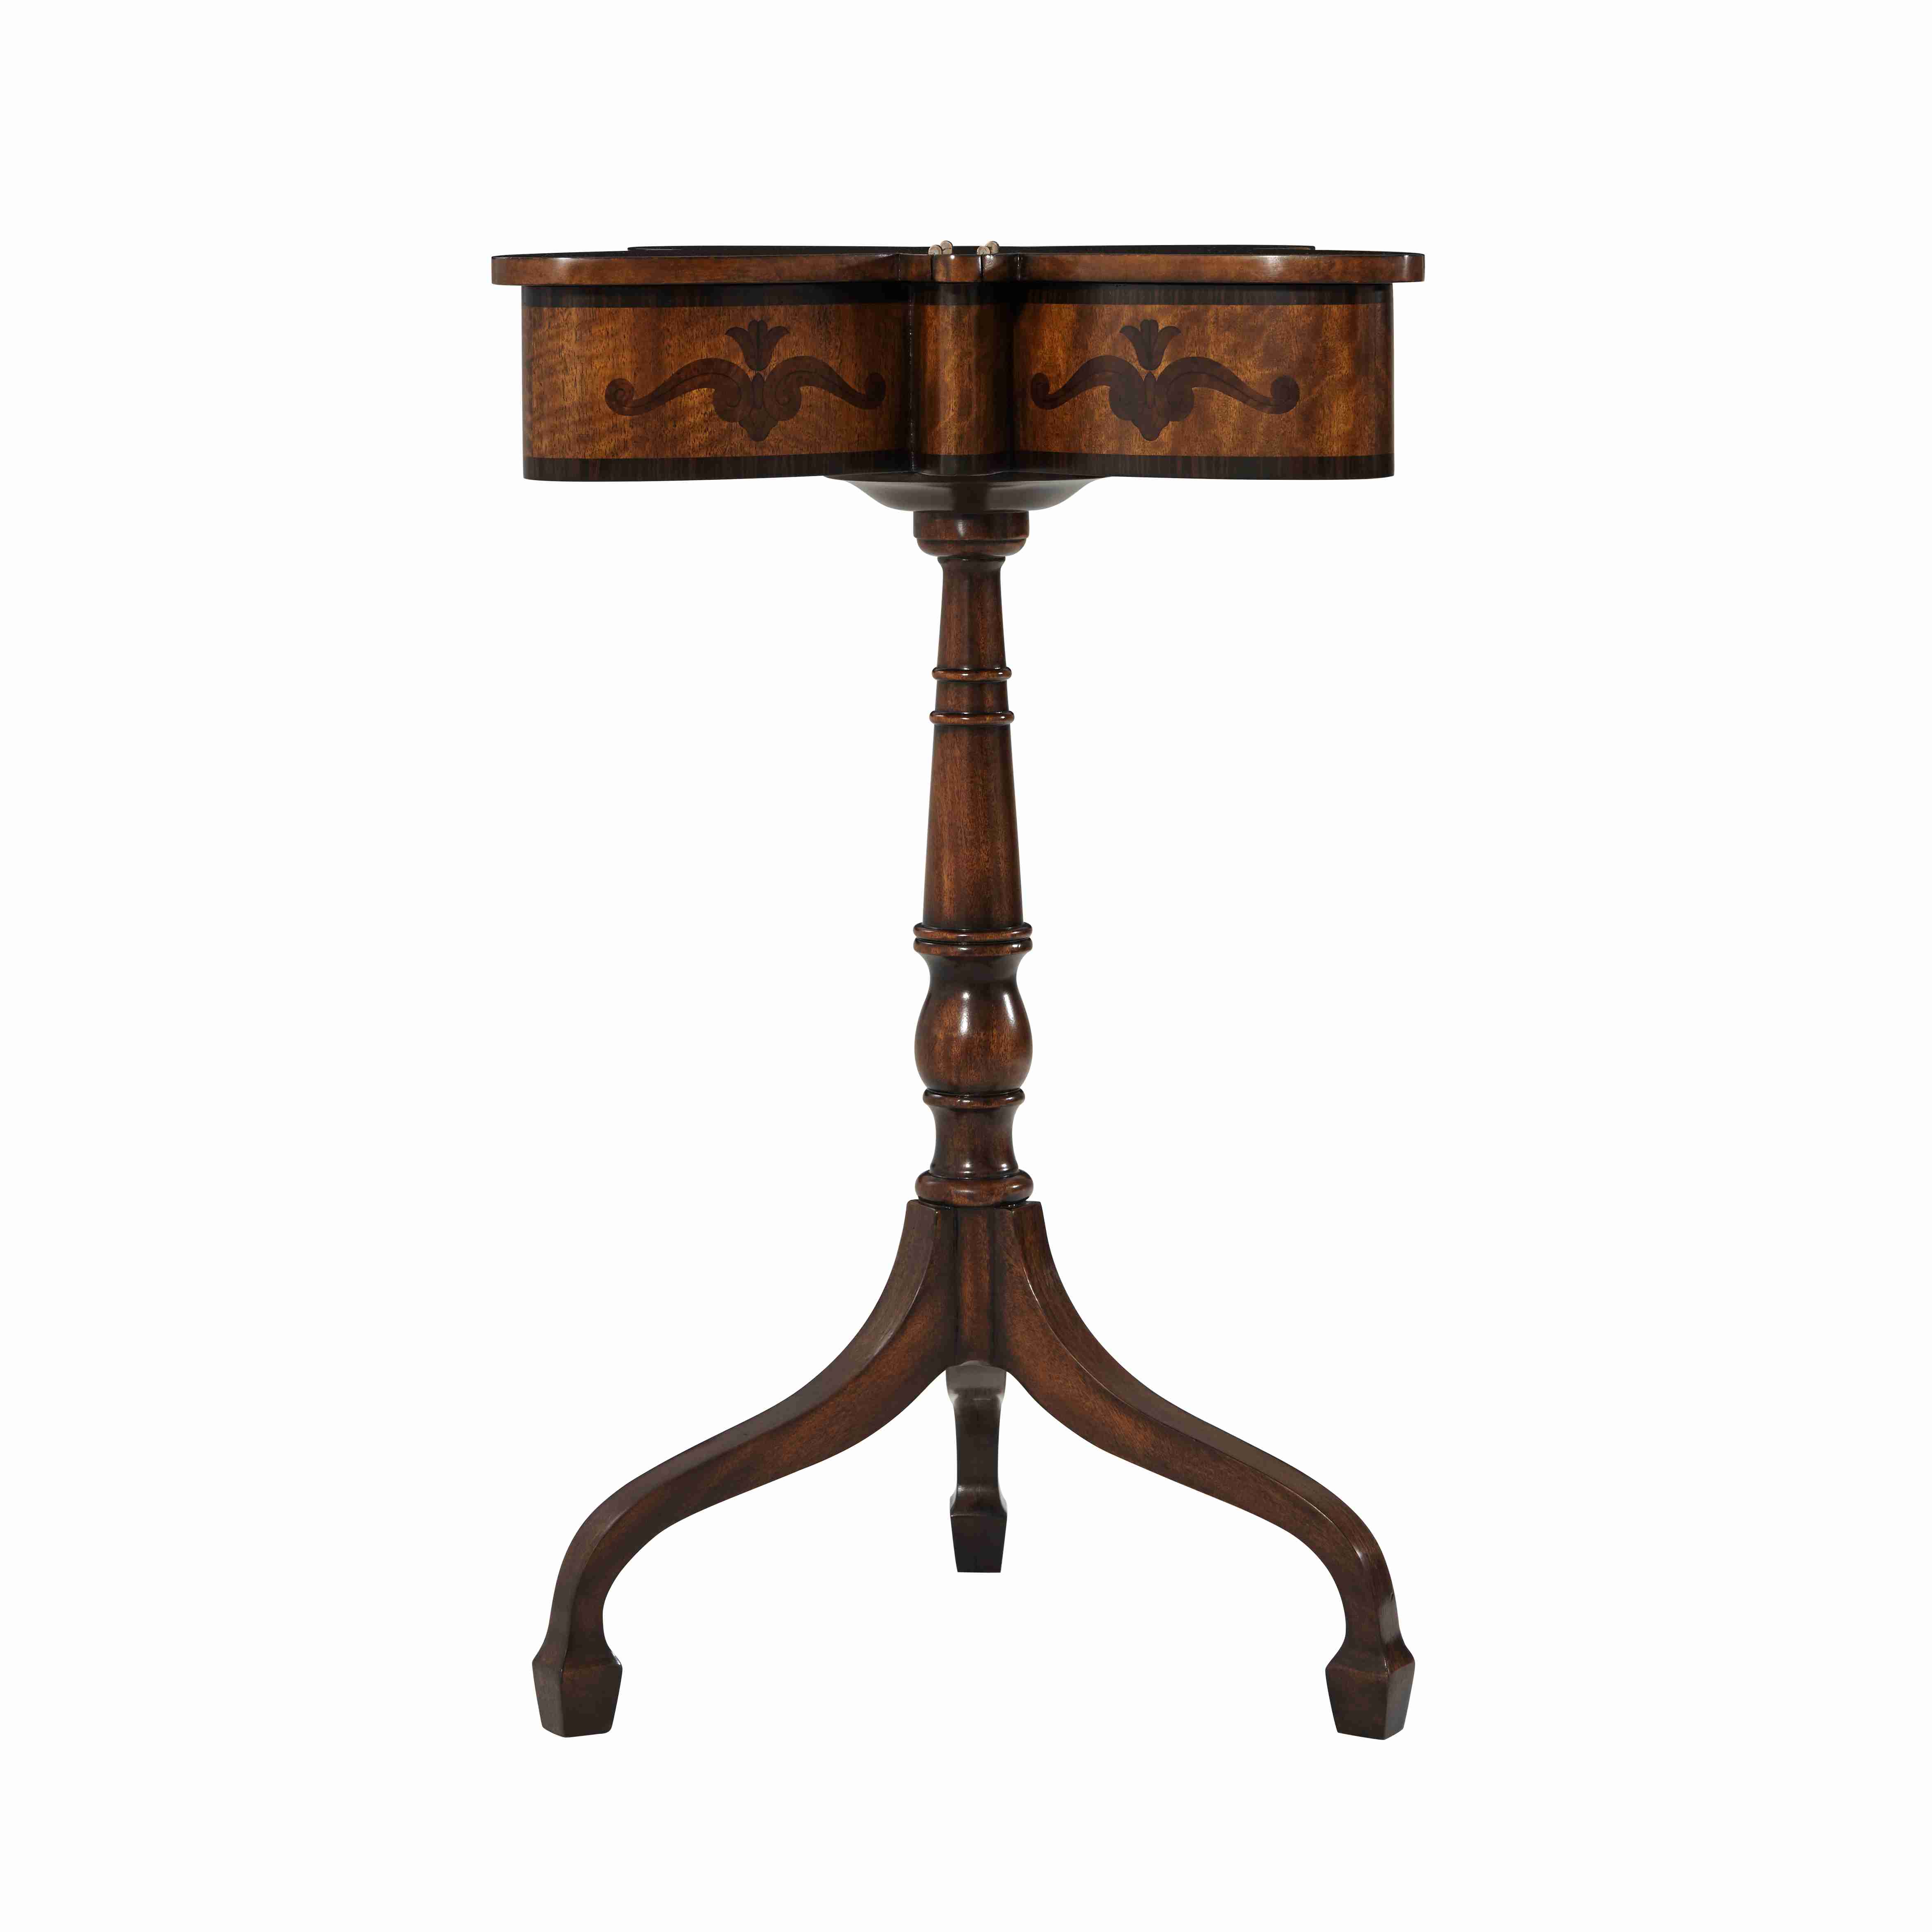 THE BUTTERFLY ACCENT TABLE